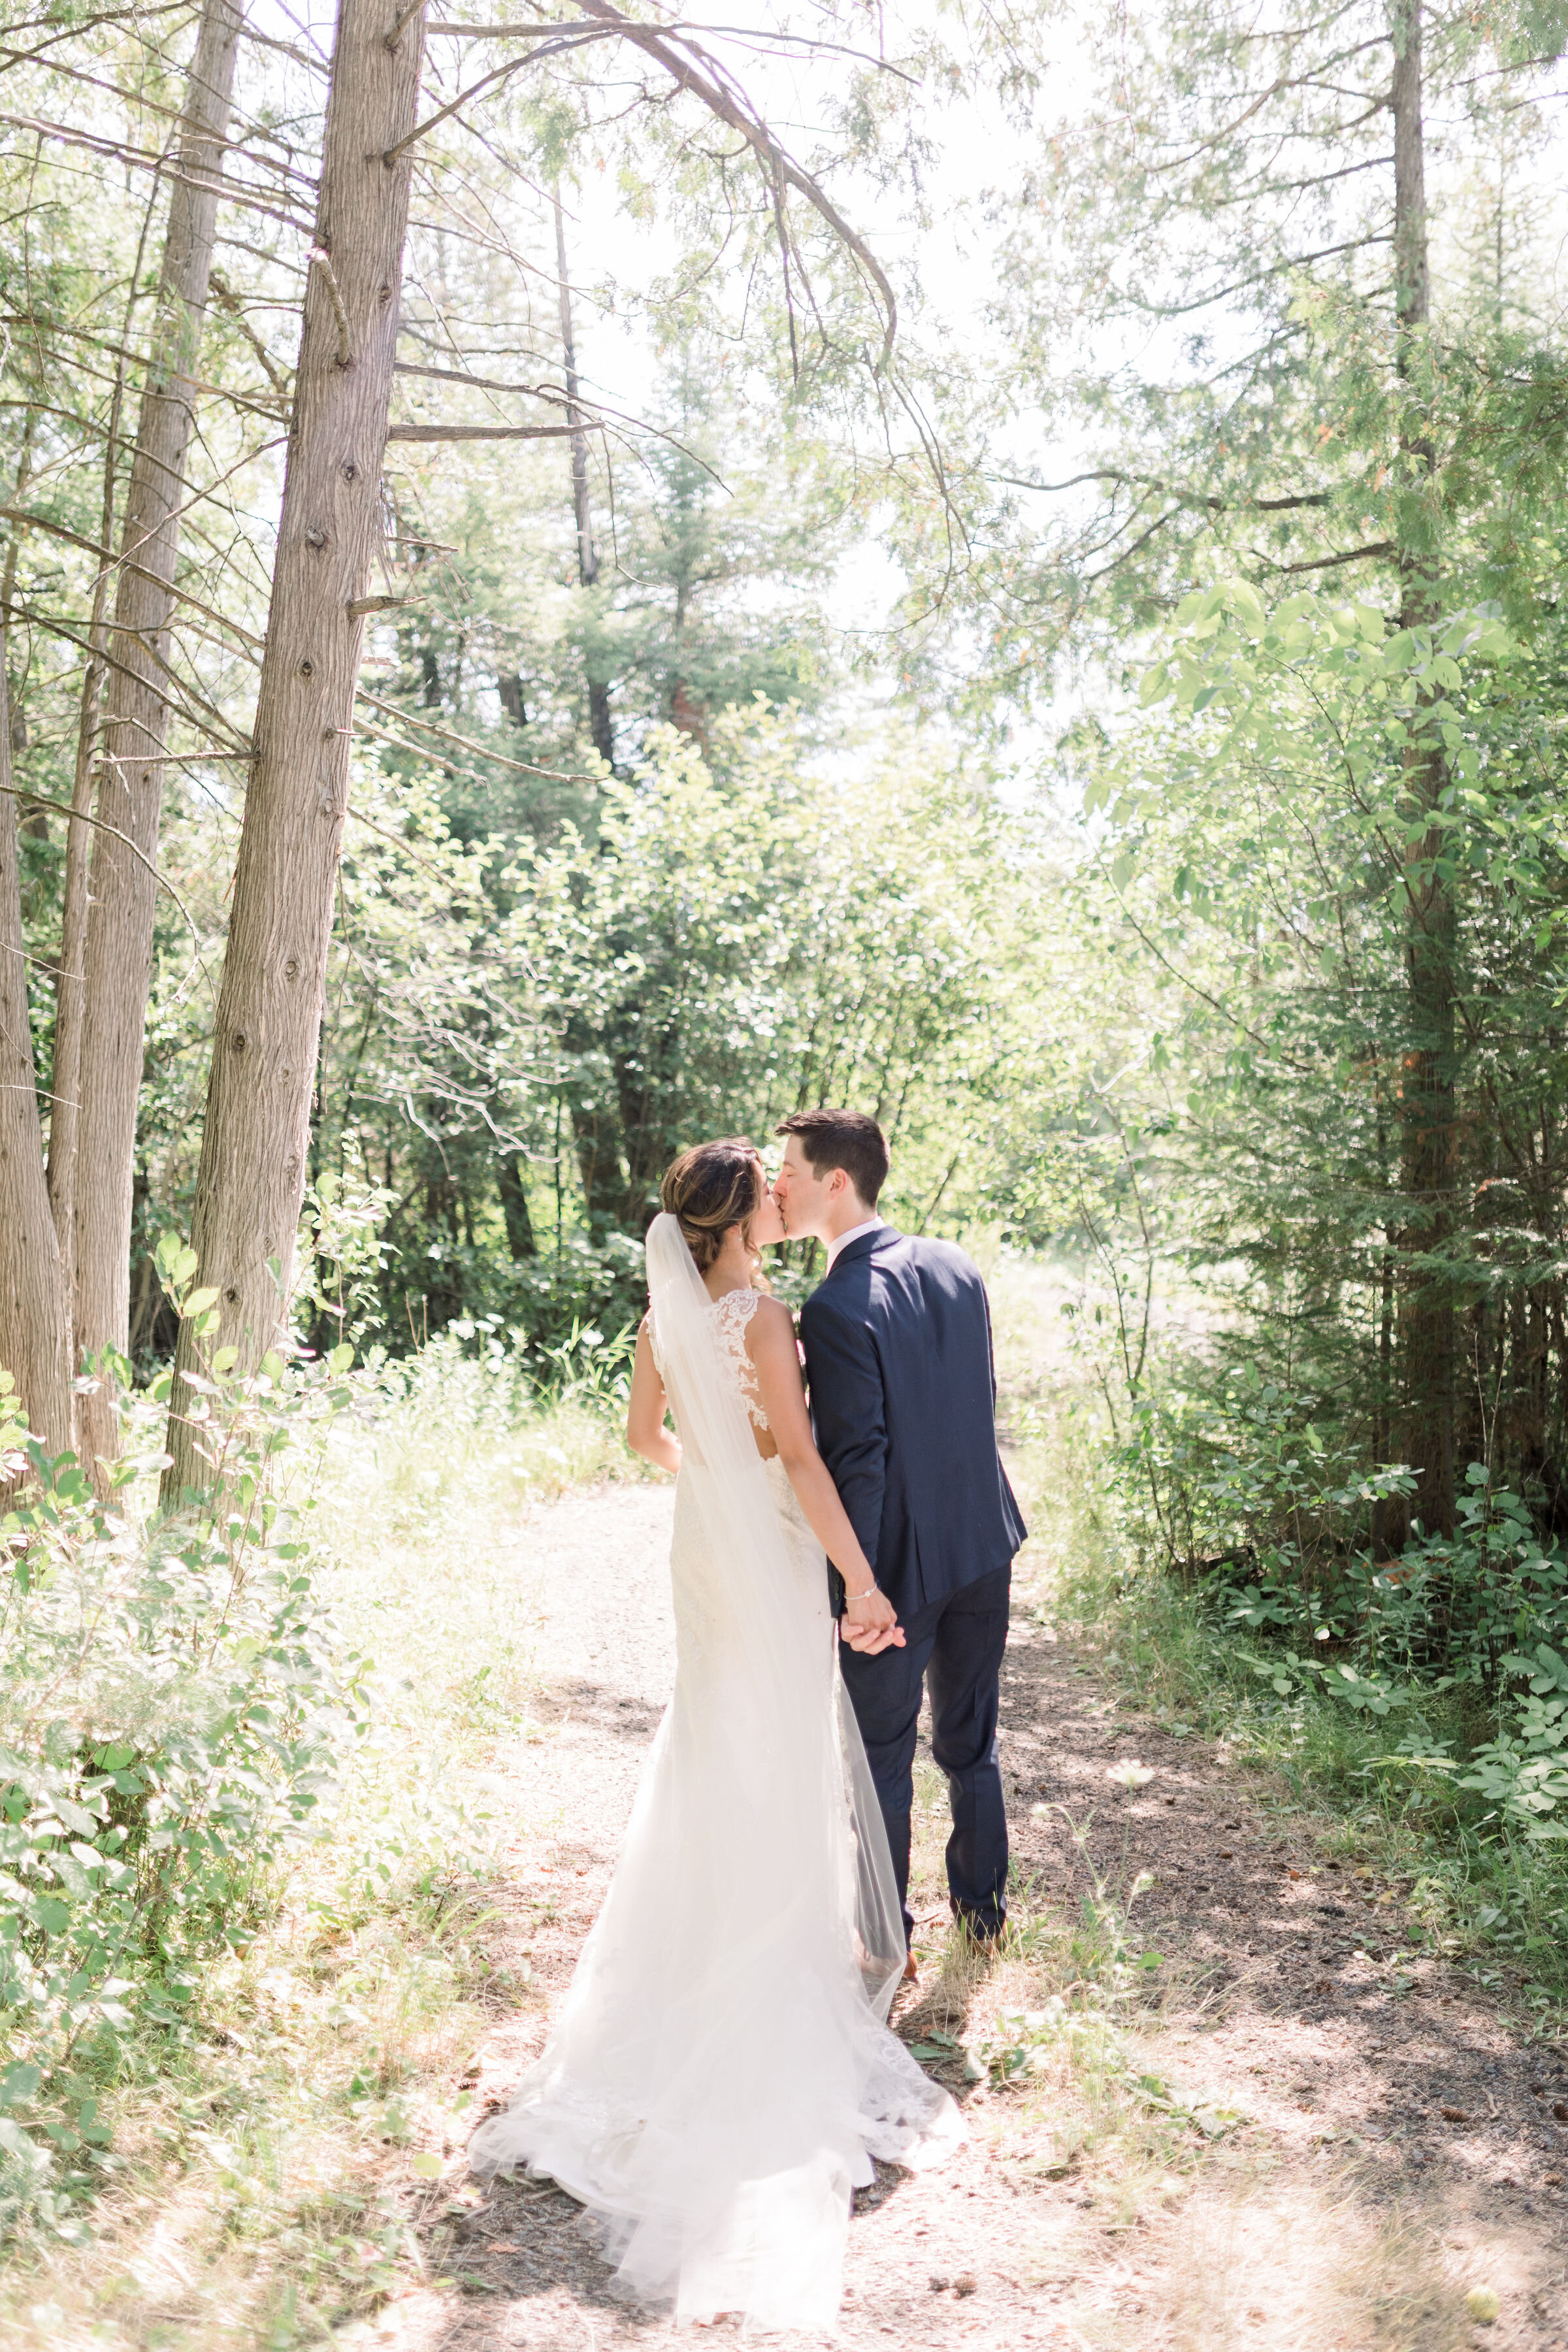  Beautiful wooded location for bride and groom formals on a nature trail with great natural lighting in Ottawa, ON by Chelsea Morgan Photogprahy. wooded location for photoshoot in ottawa woods for photoshoot in ottawa great lighting for bride and gro